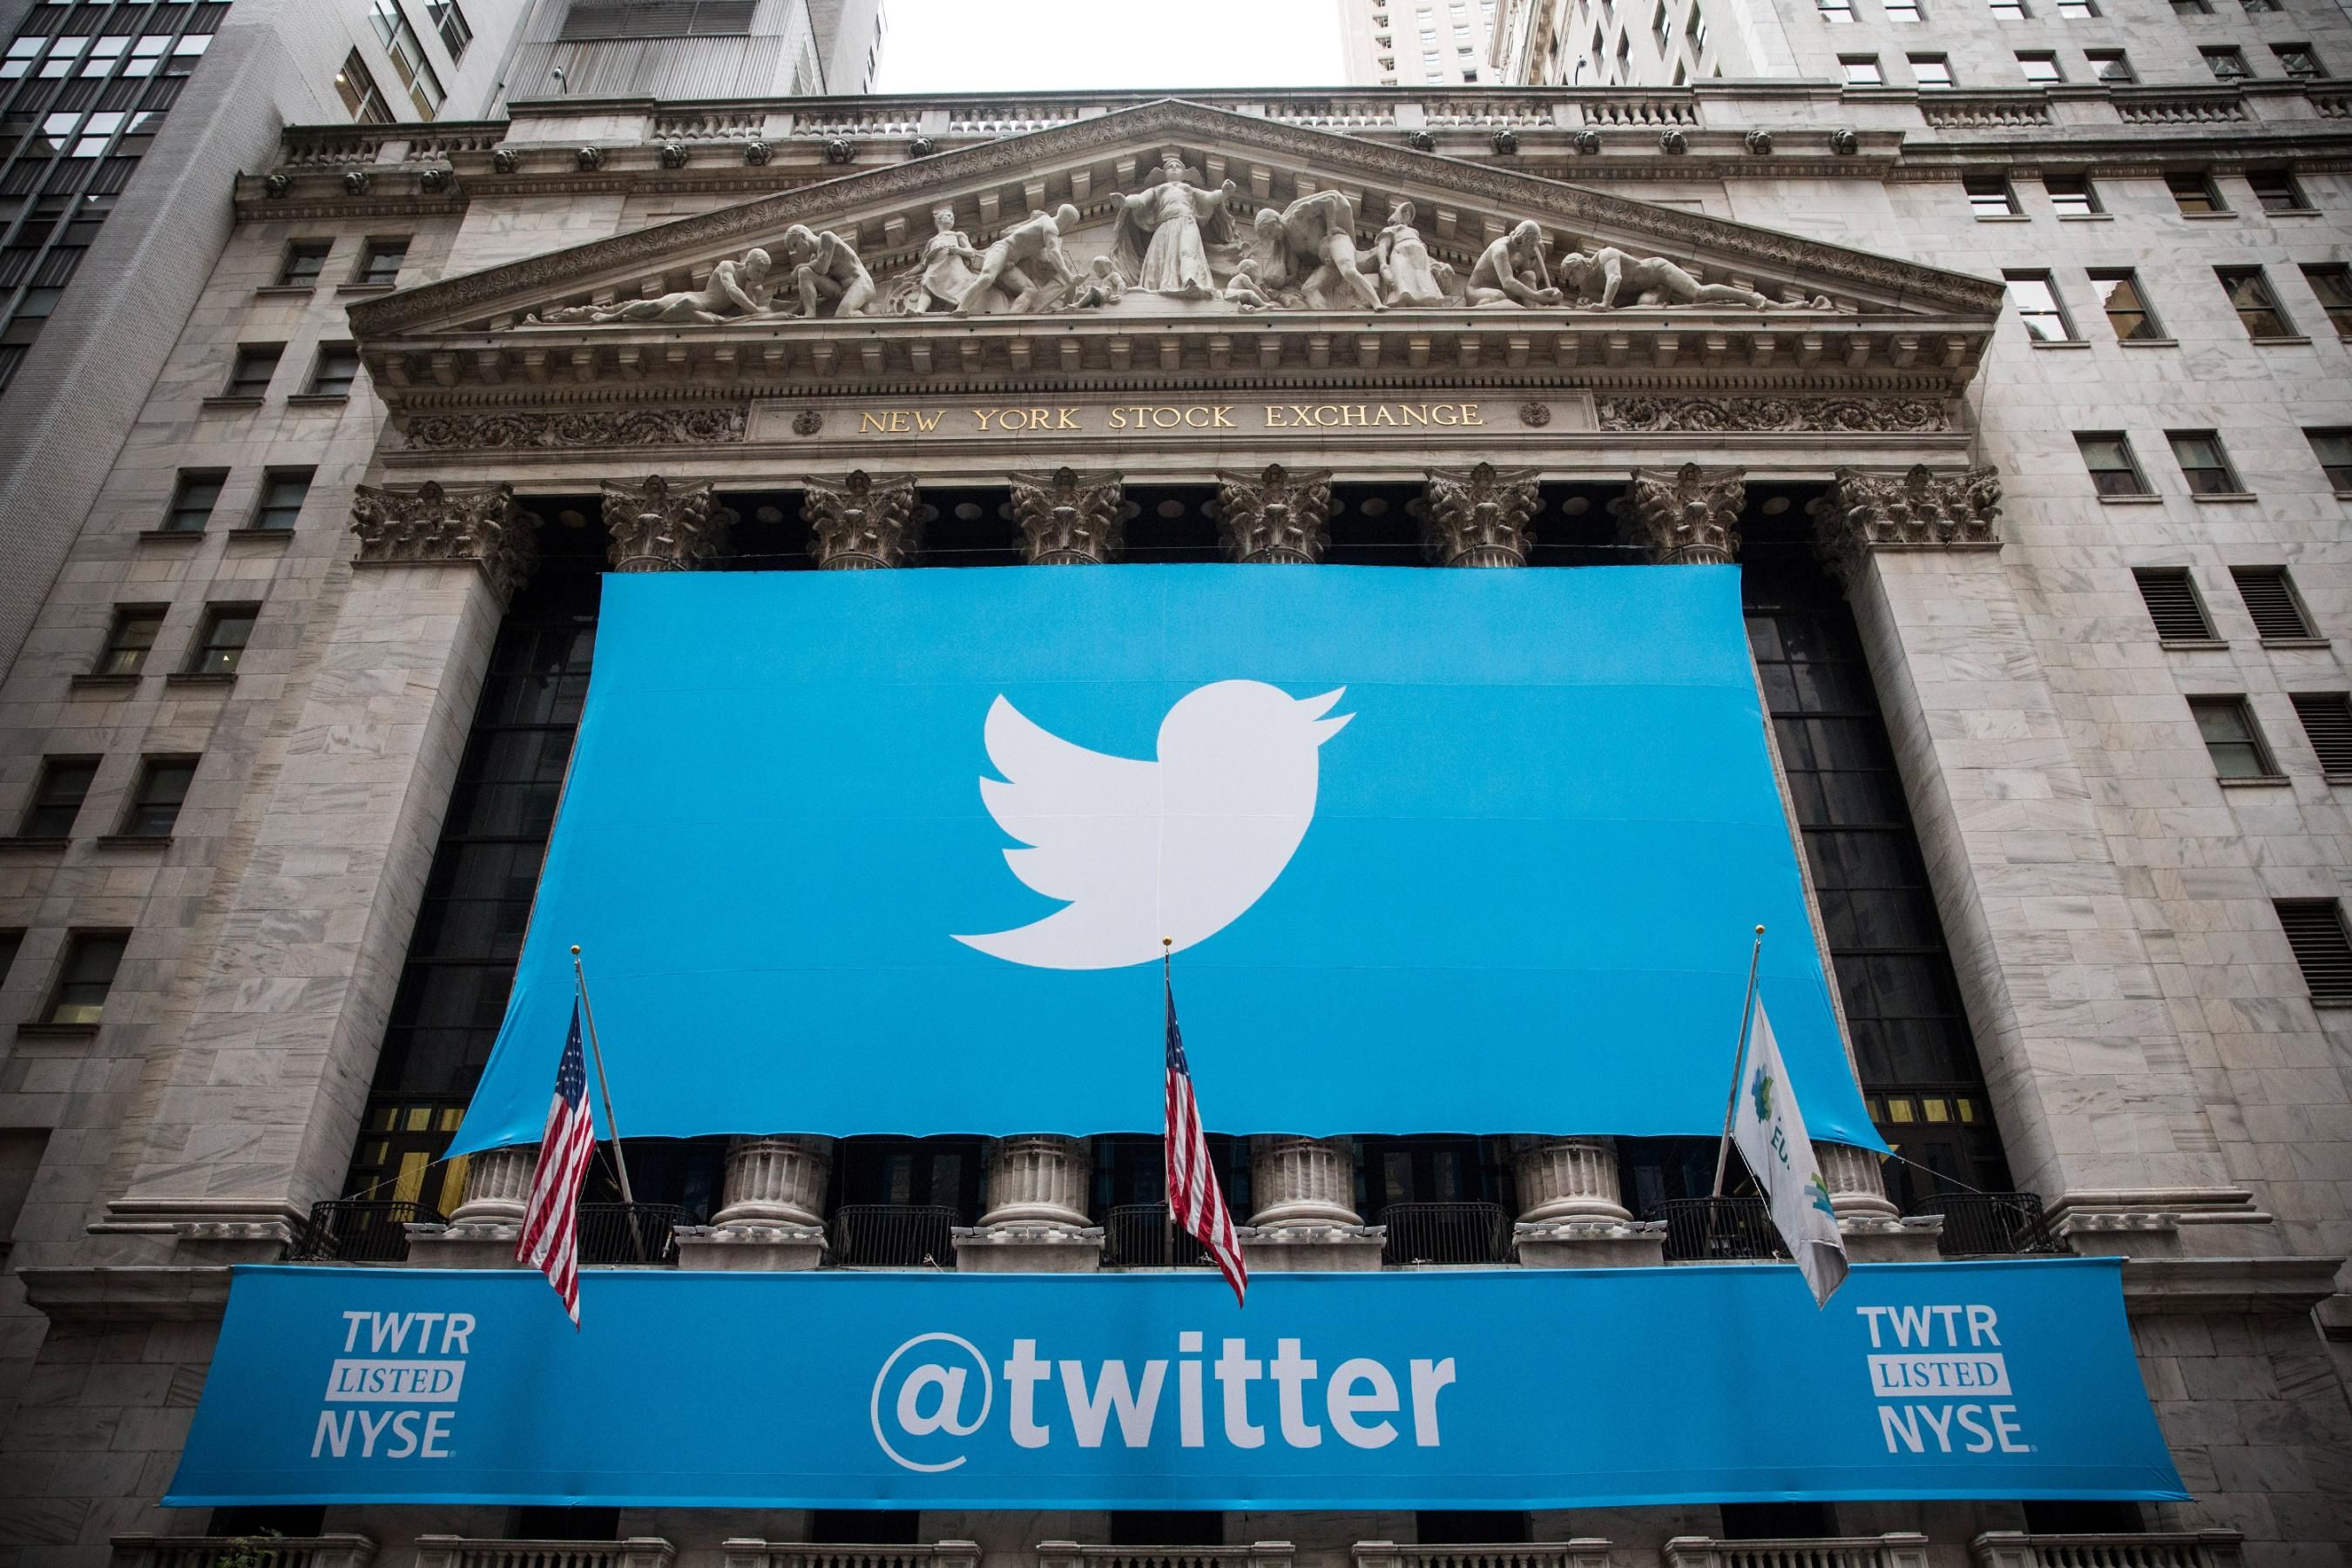 The Twitter logo is displayed on a banner outside the New York Stock Exchange on November 7, 2013 in New York City. (Photo: Andrew Burton via Getty Images)